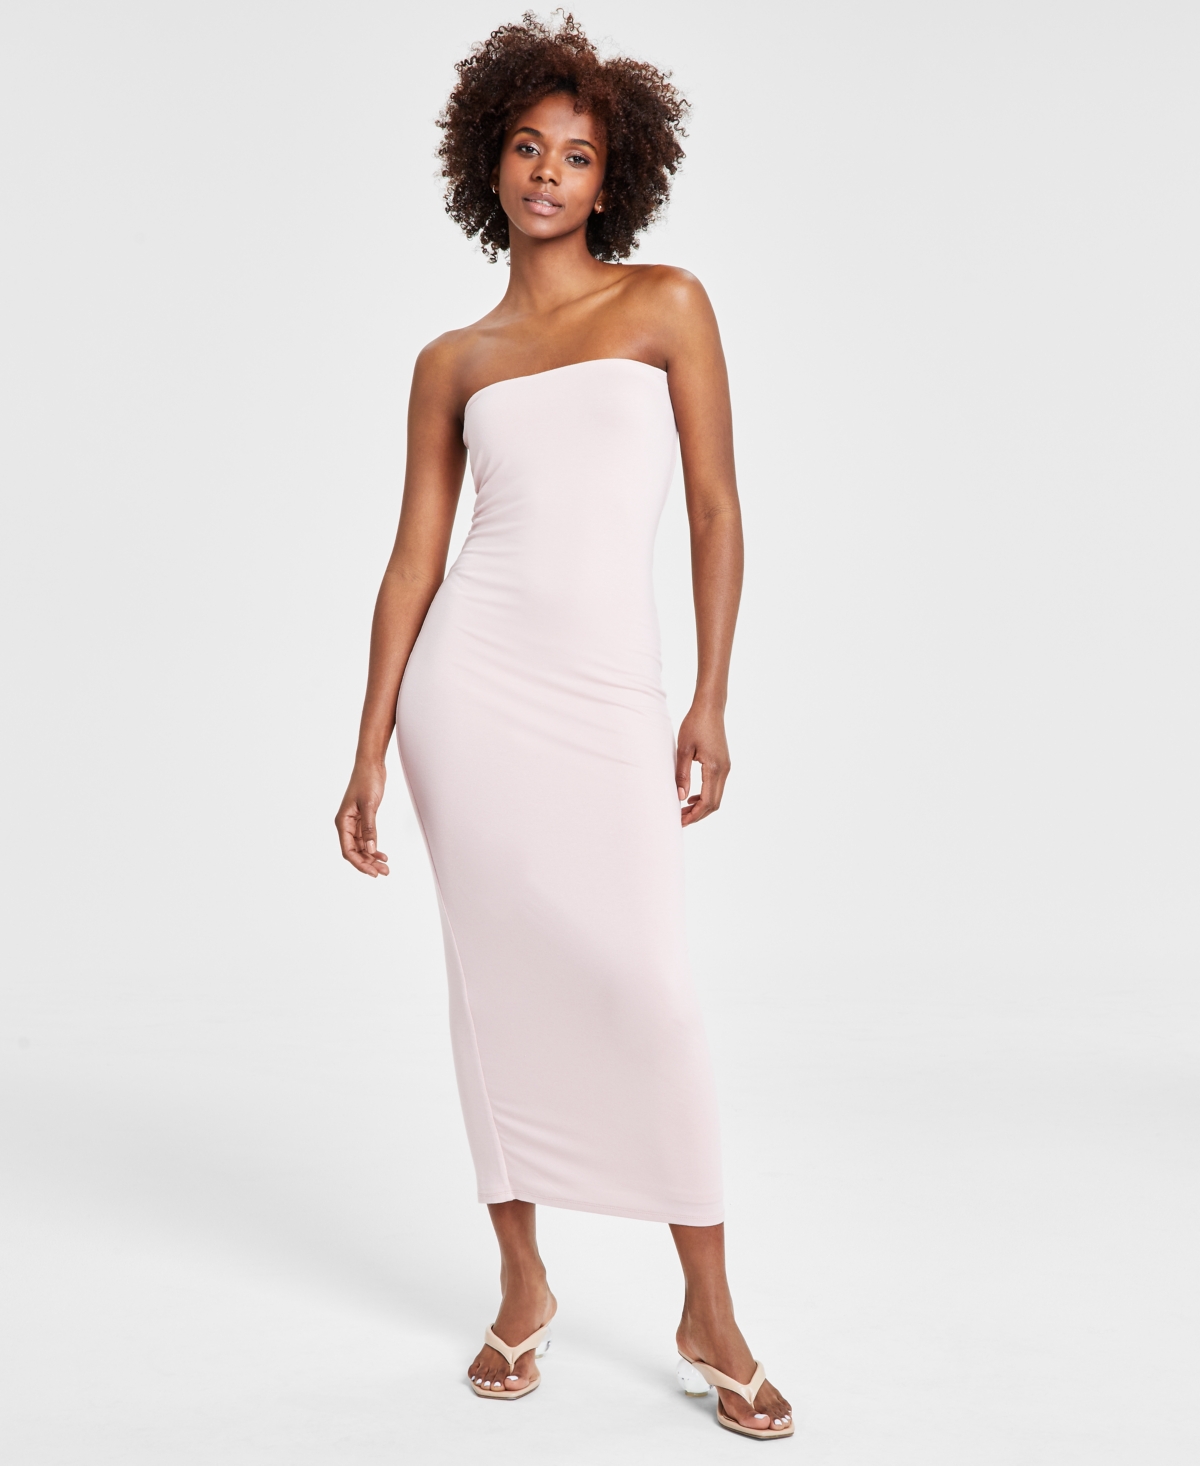 Bar Iii Women's Strapless Bodycon Maxi Dress, Created For Macy's In Polished Nude